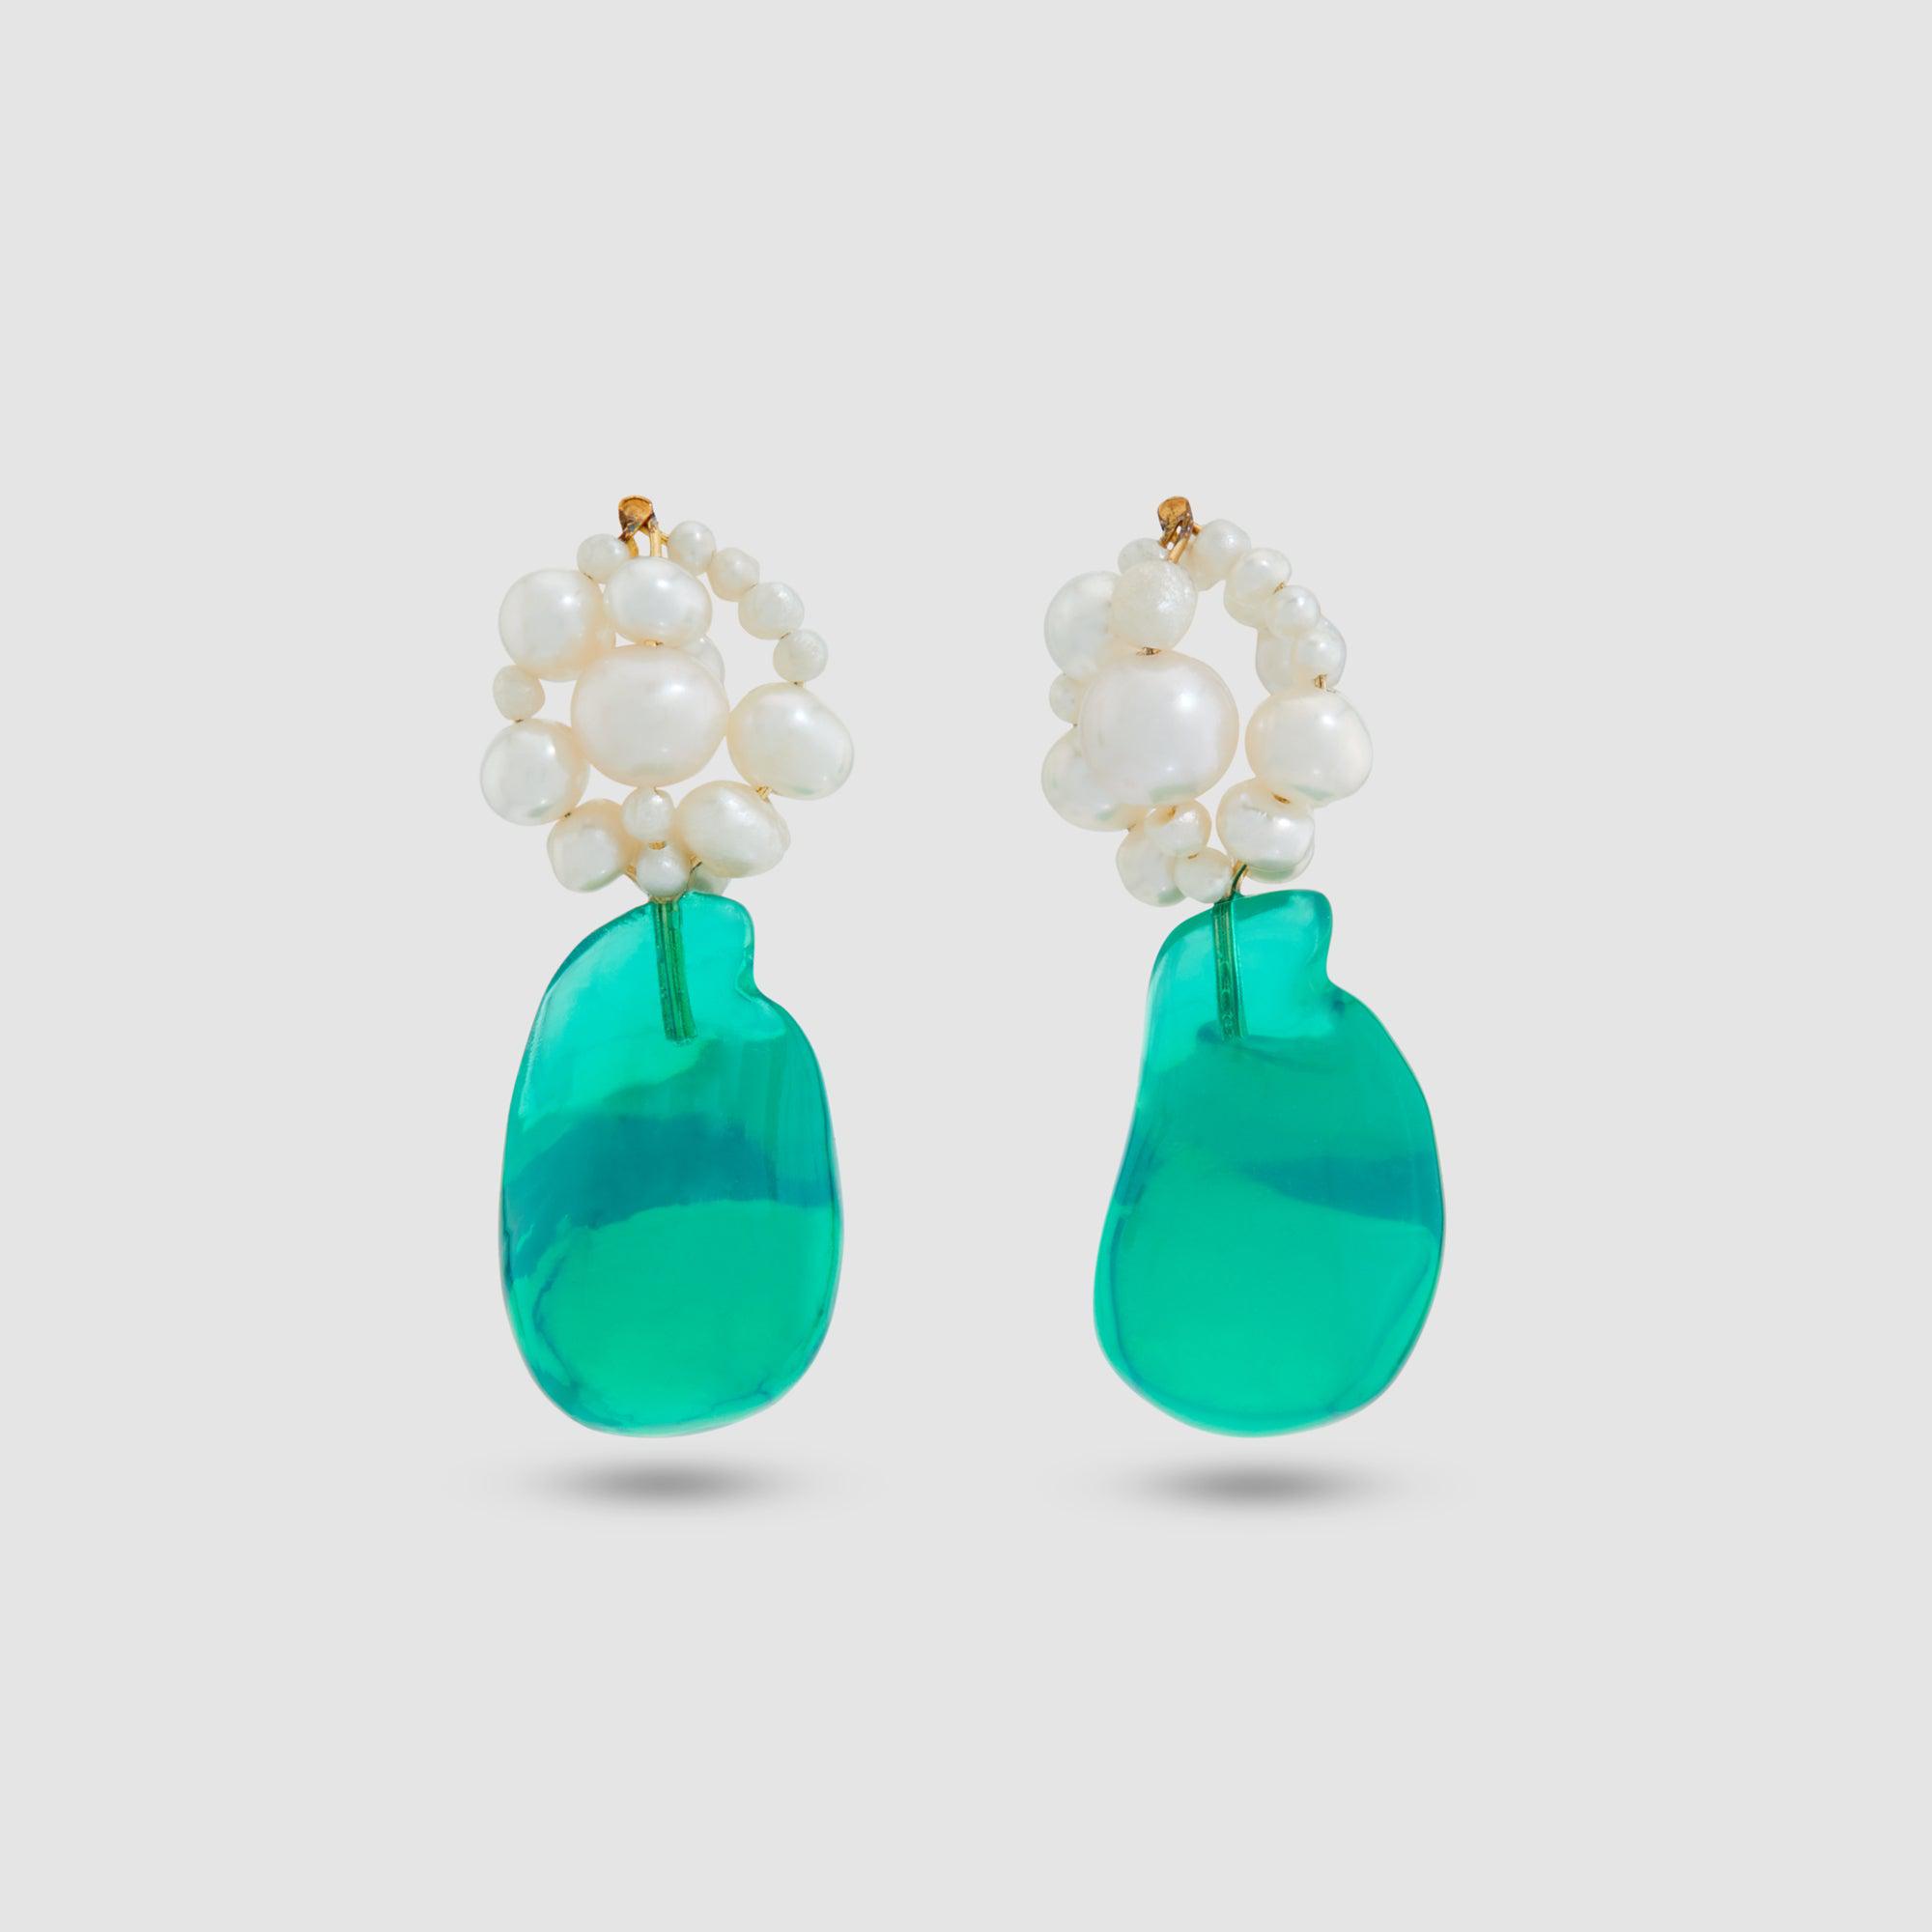 Completedworks Pearls earrings with Resin by COMPLETEDWORKS